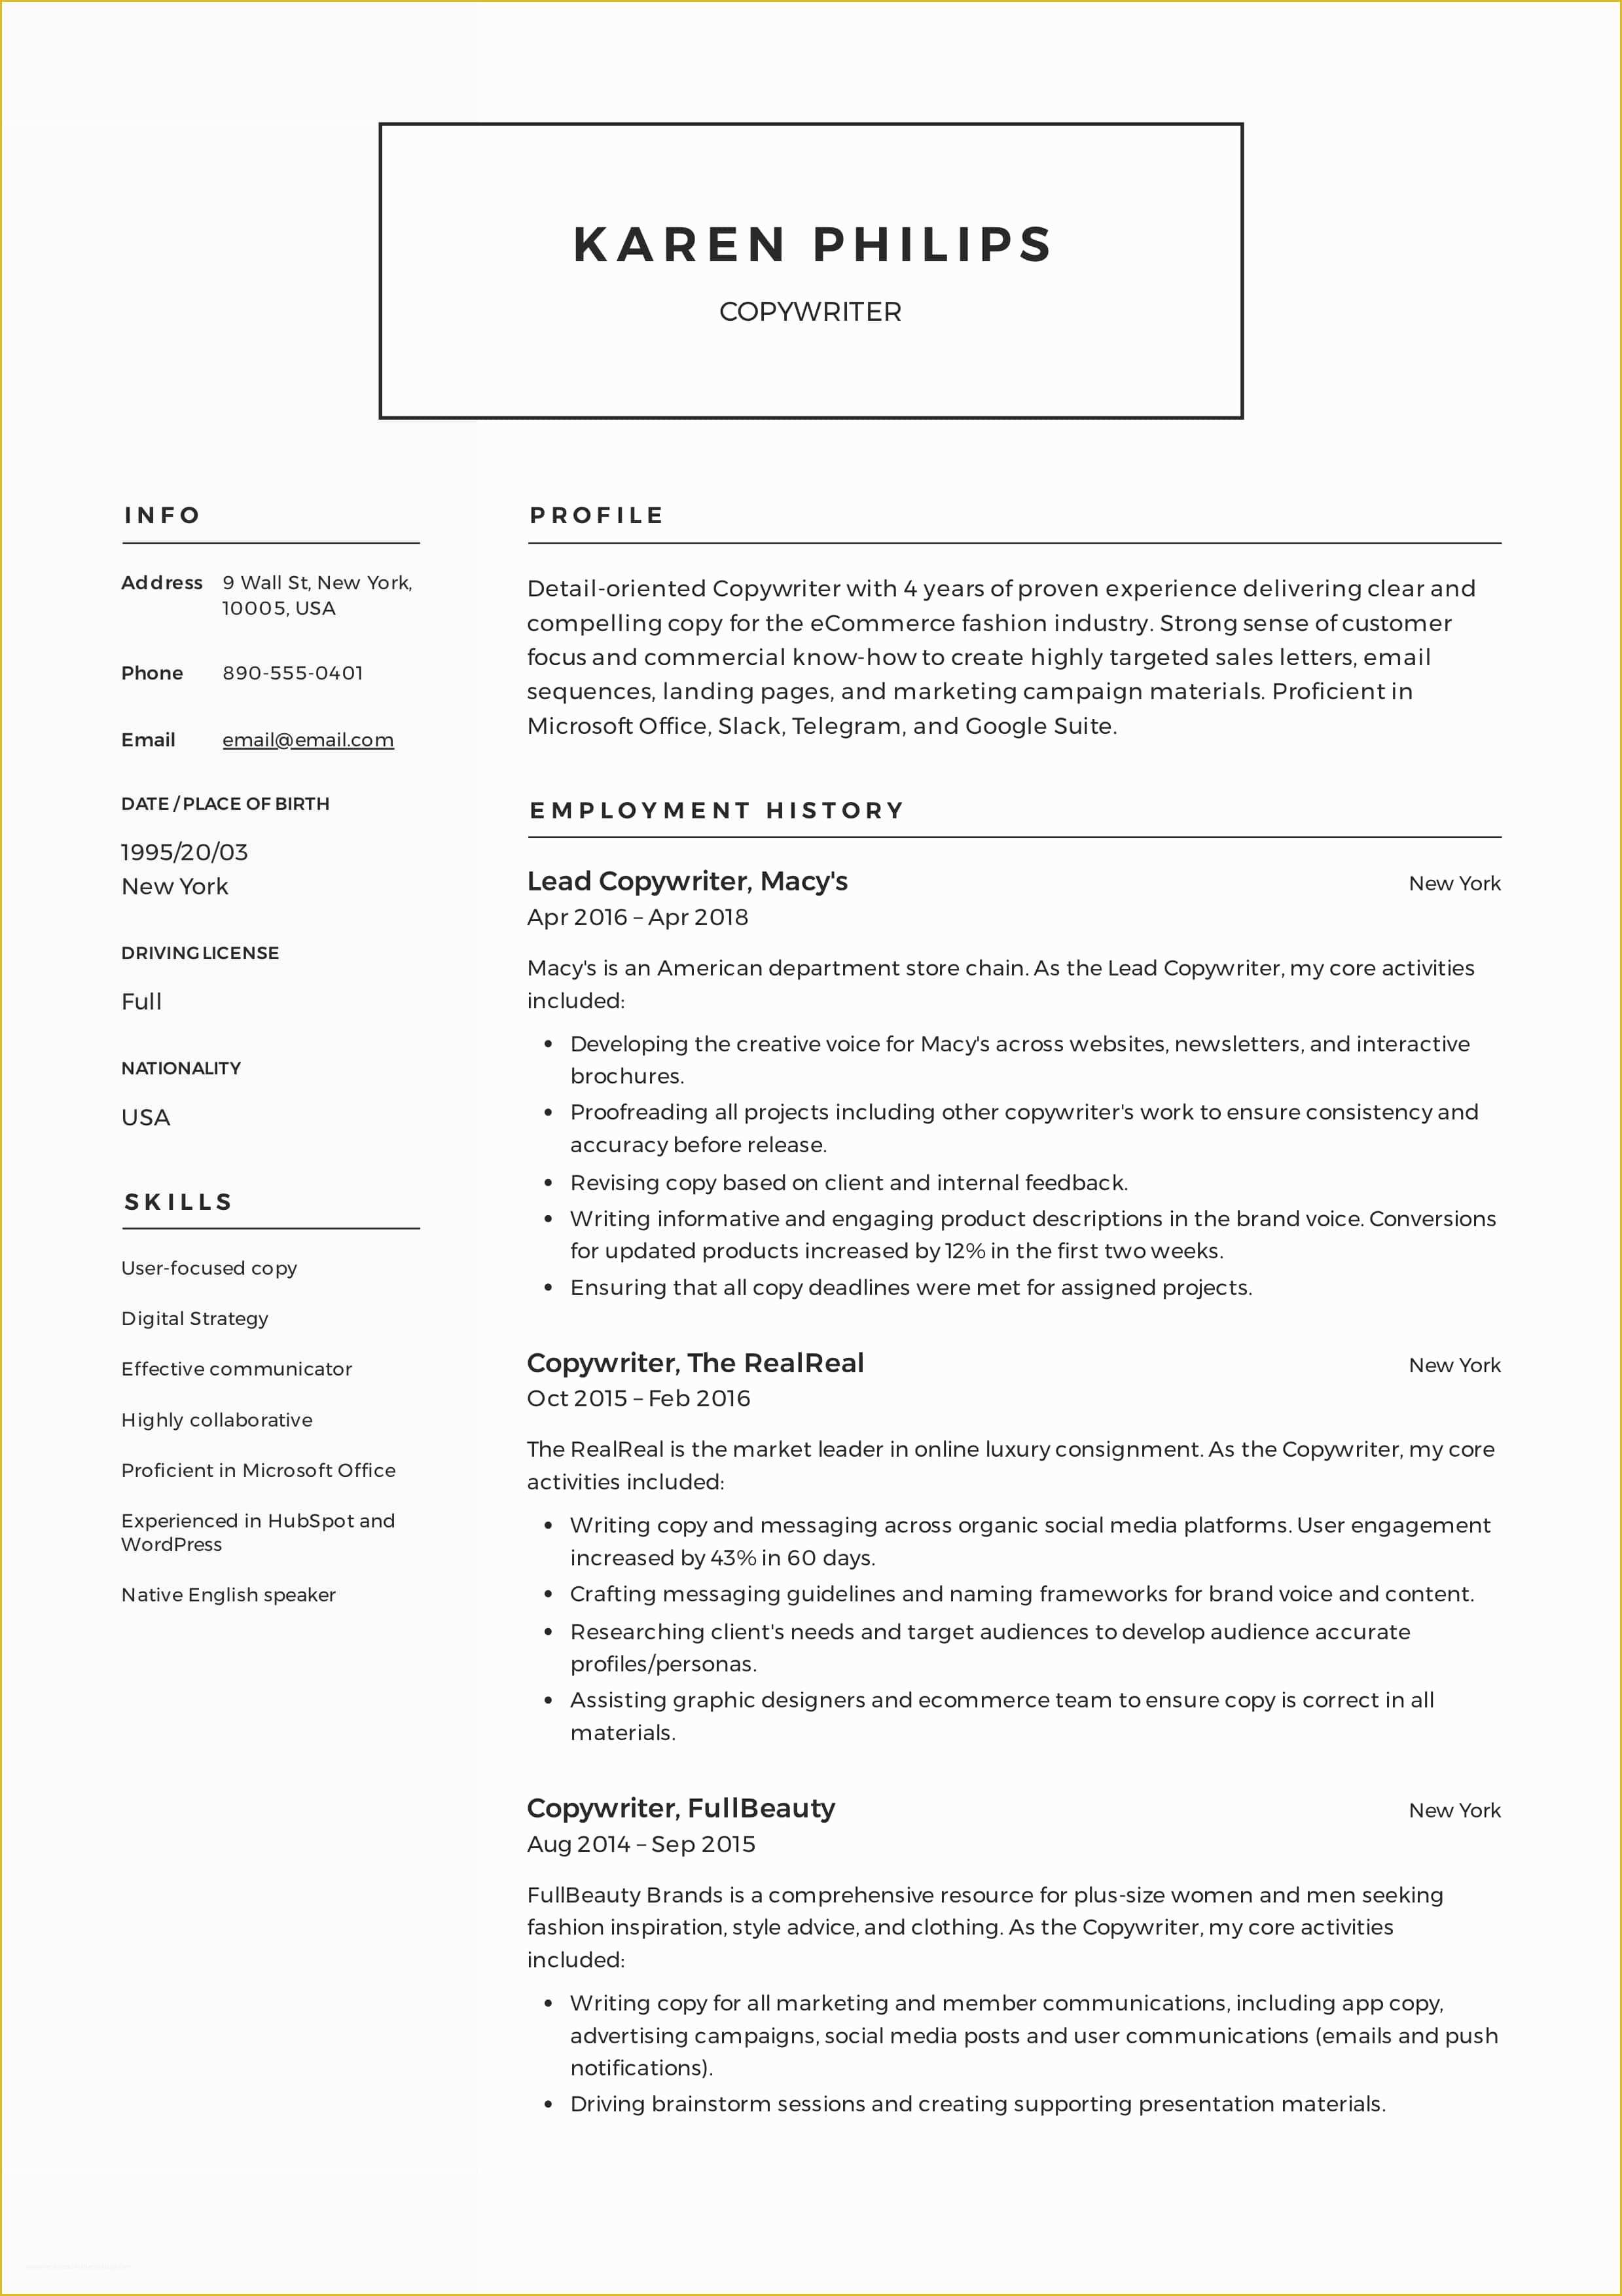 Free Copywriting Templates Of Guide 12 Different Copywriter Resume Samples 2019